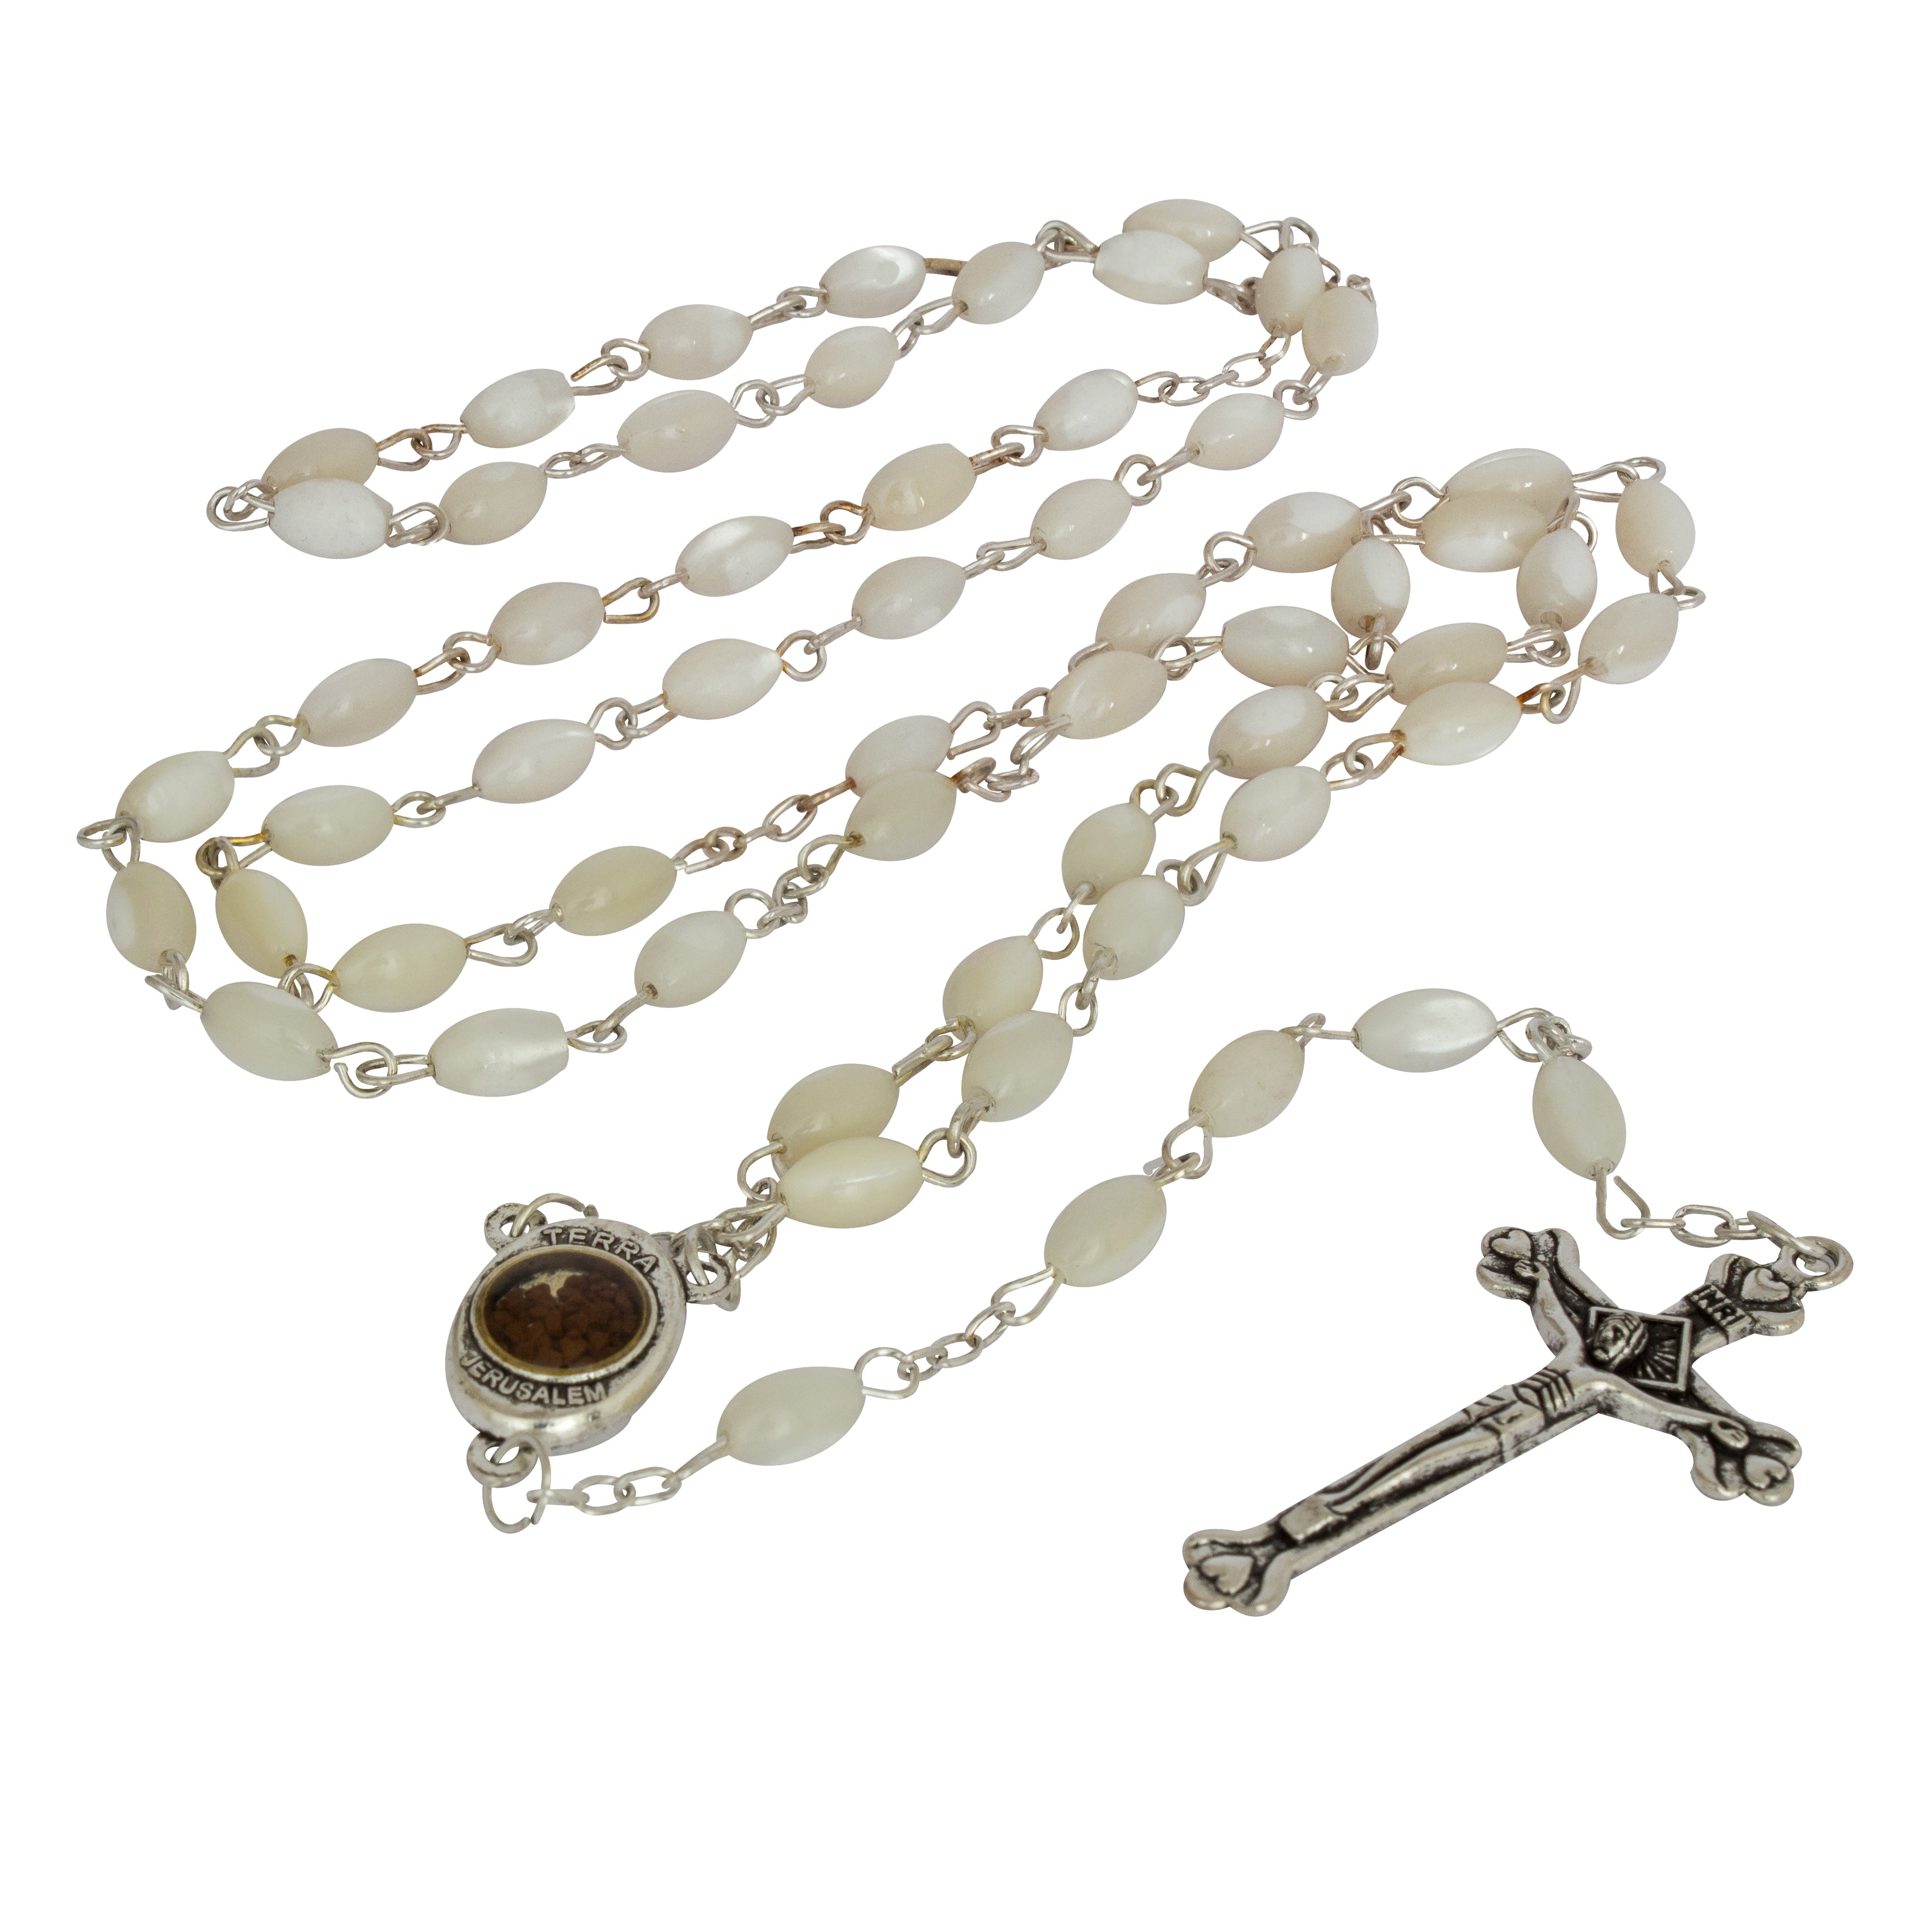 Catholic Rosary Necklace in Swarovski Crystal White Pearls and Sterling  Silver